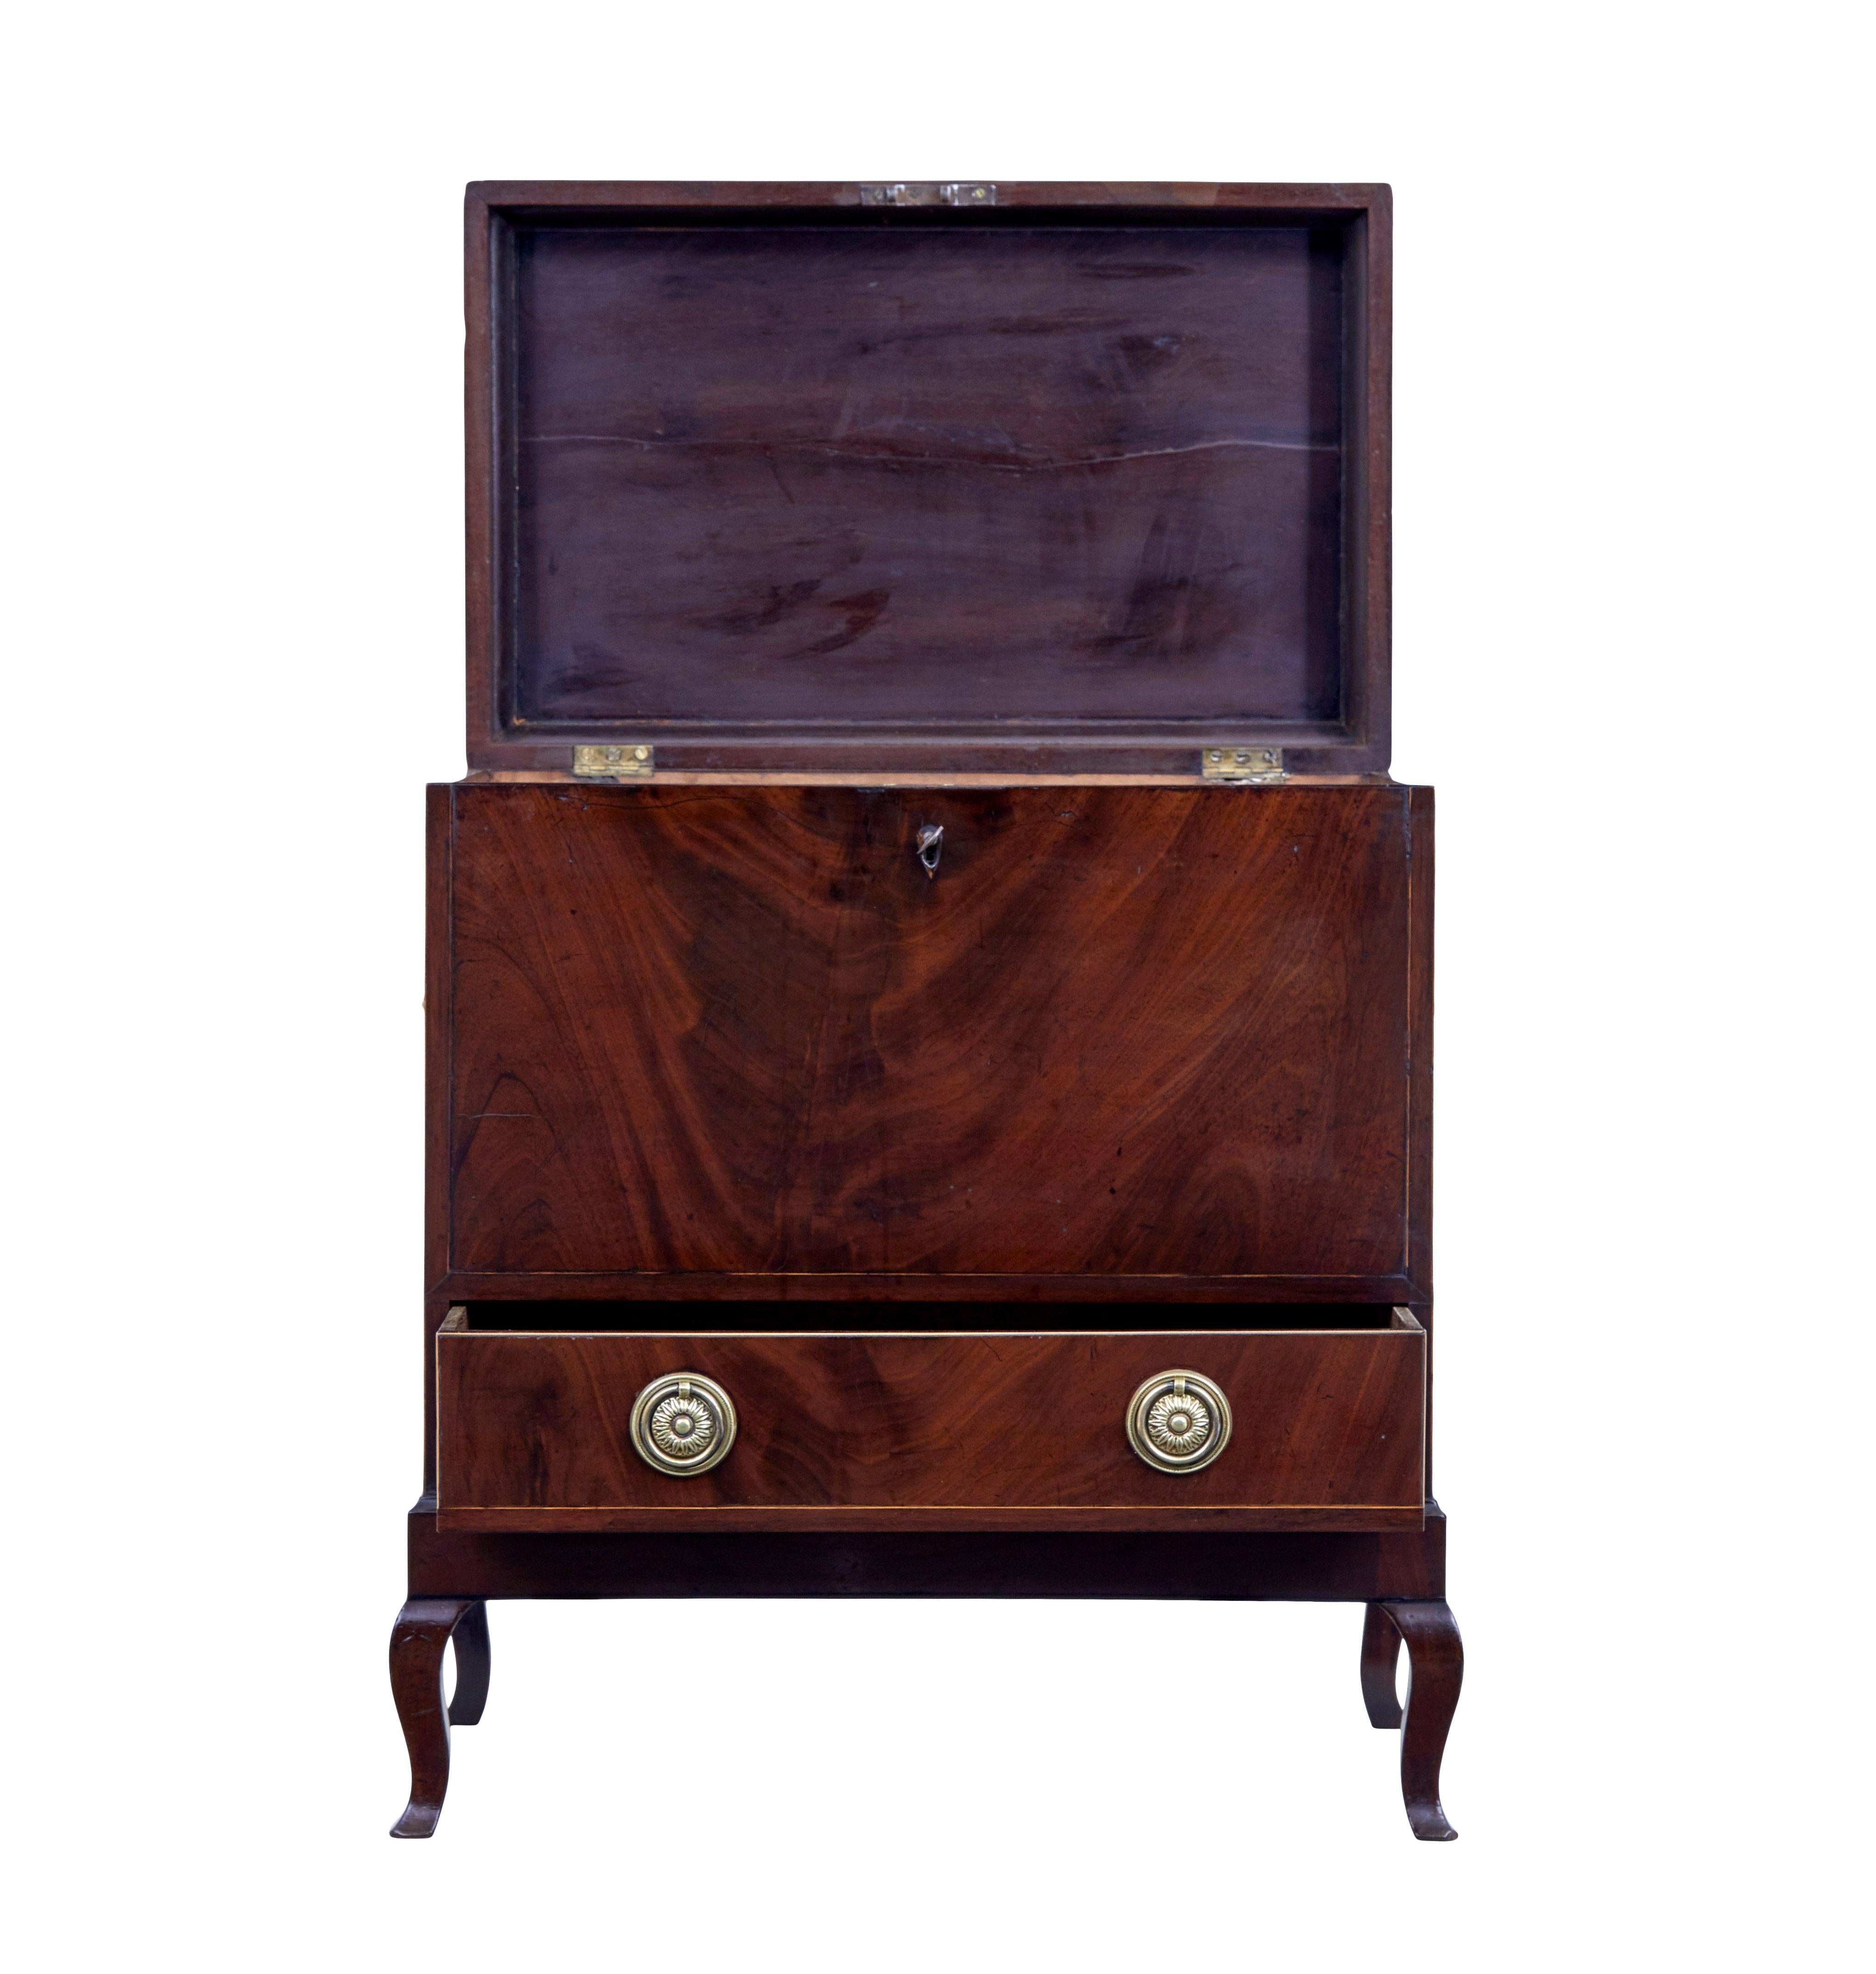 Sheraton Early 20th century Edwardian mahogany inlaid wine cooler For Sale